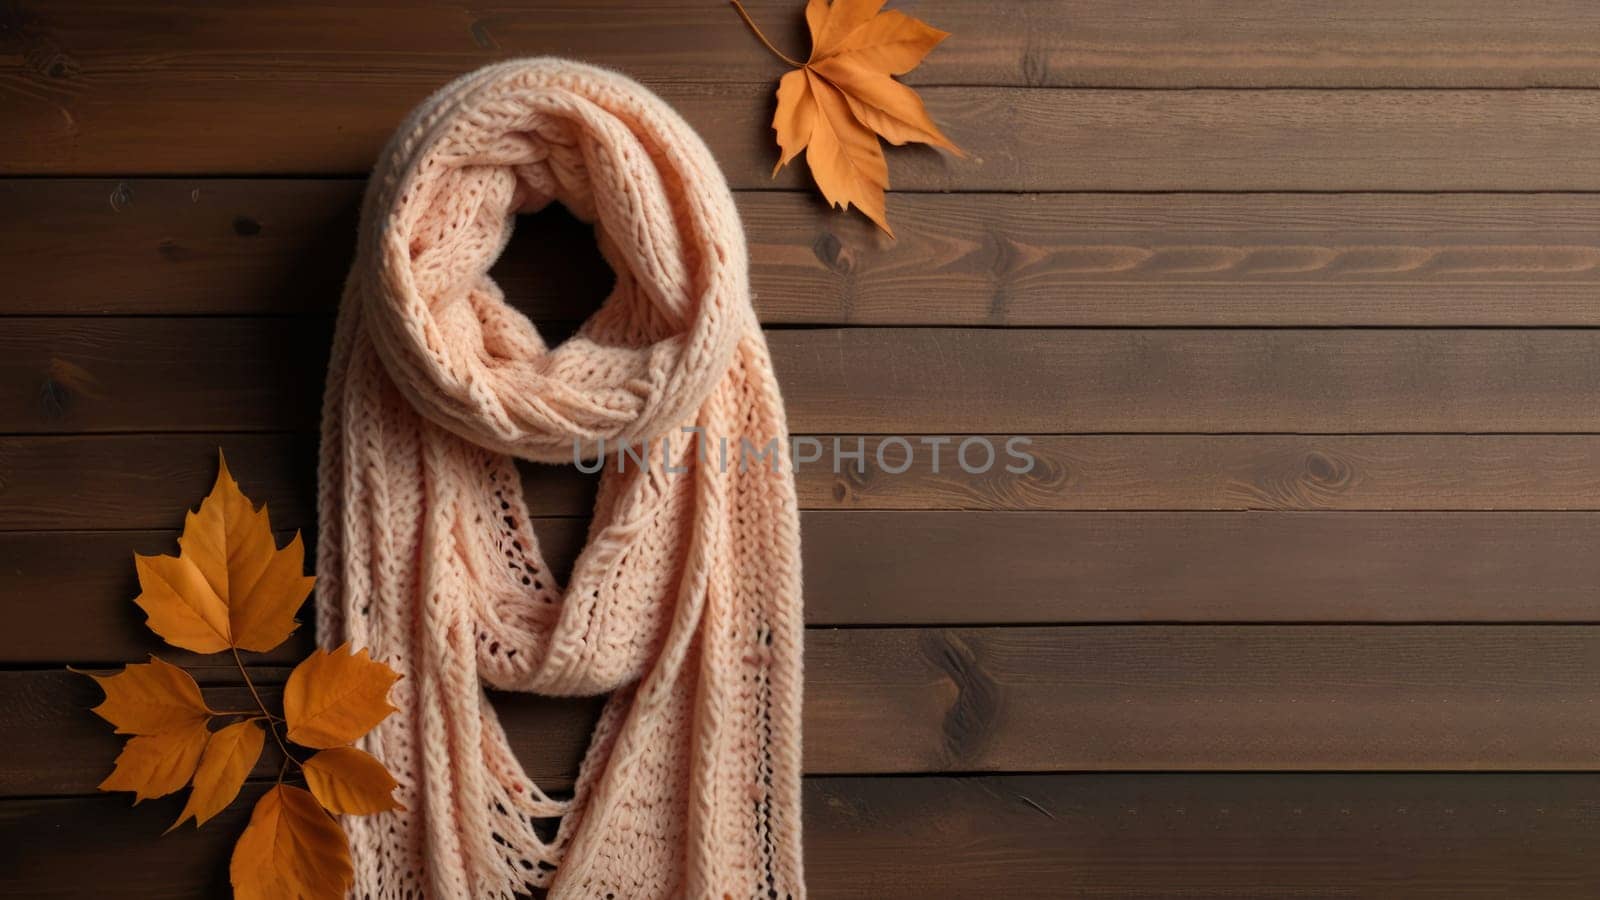 Cozy autumn vibes: knitted scarf, wool hat, and fall leaves on wooden background by Annu1tochka